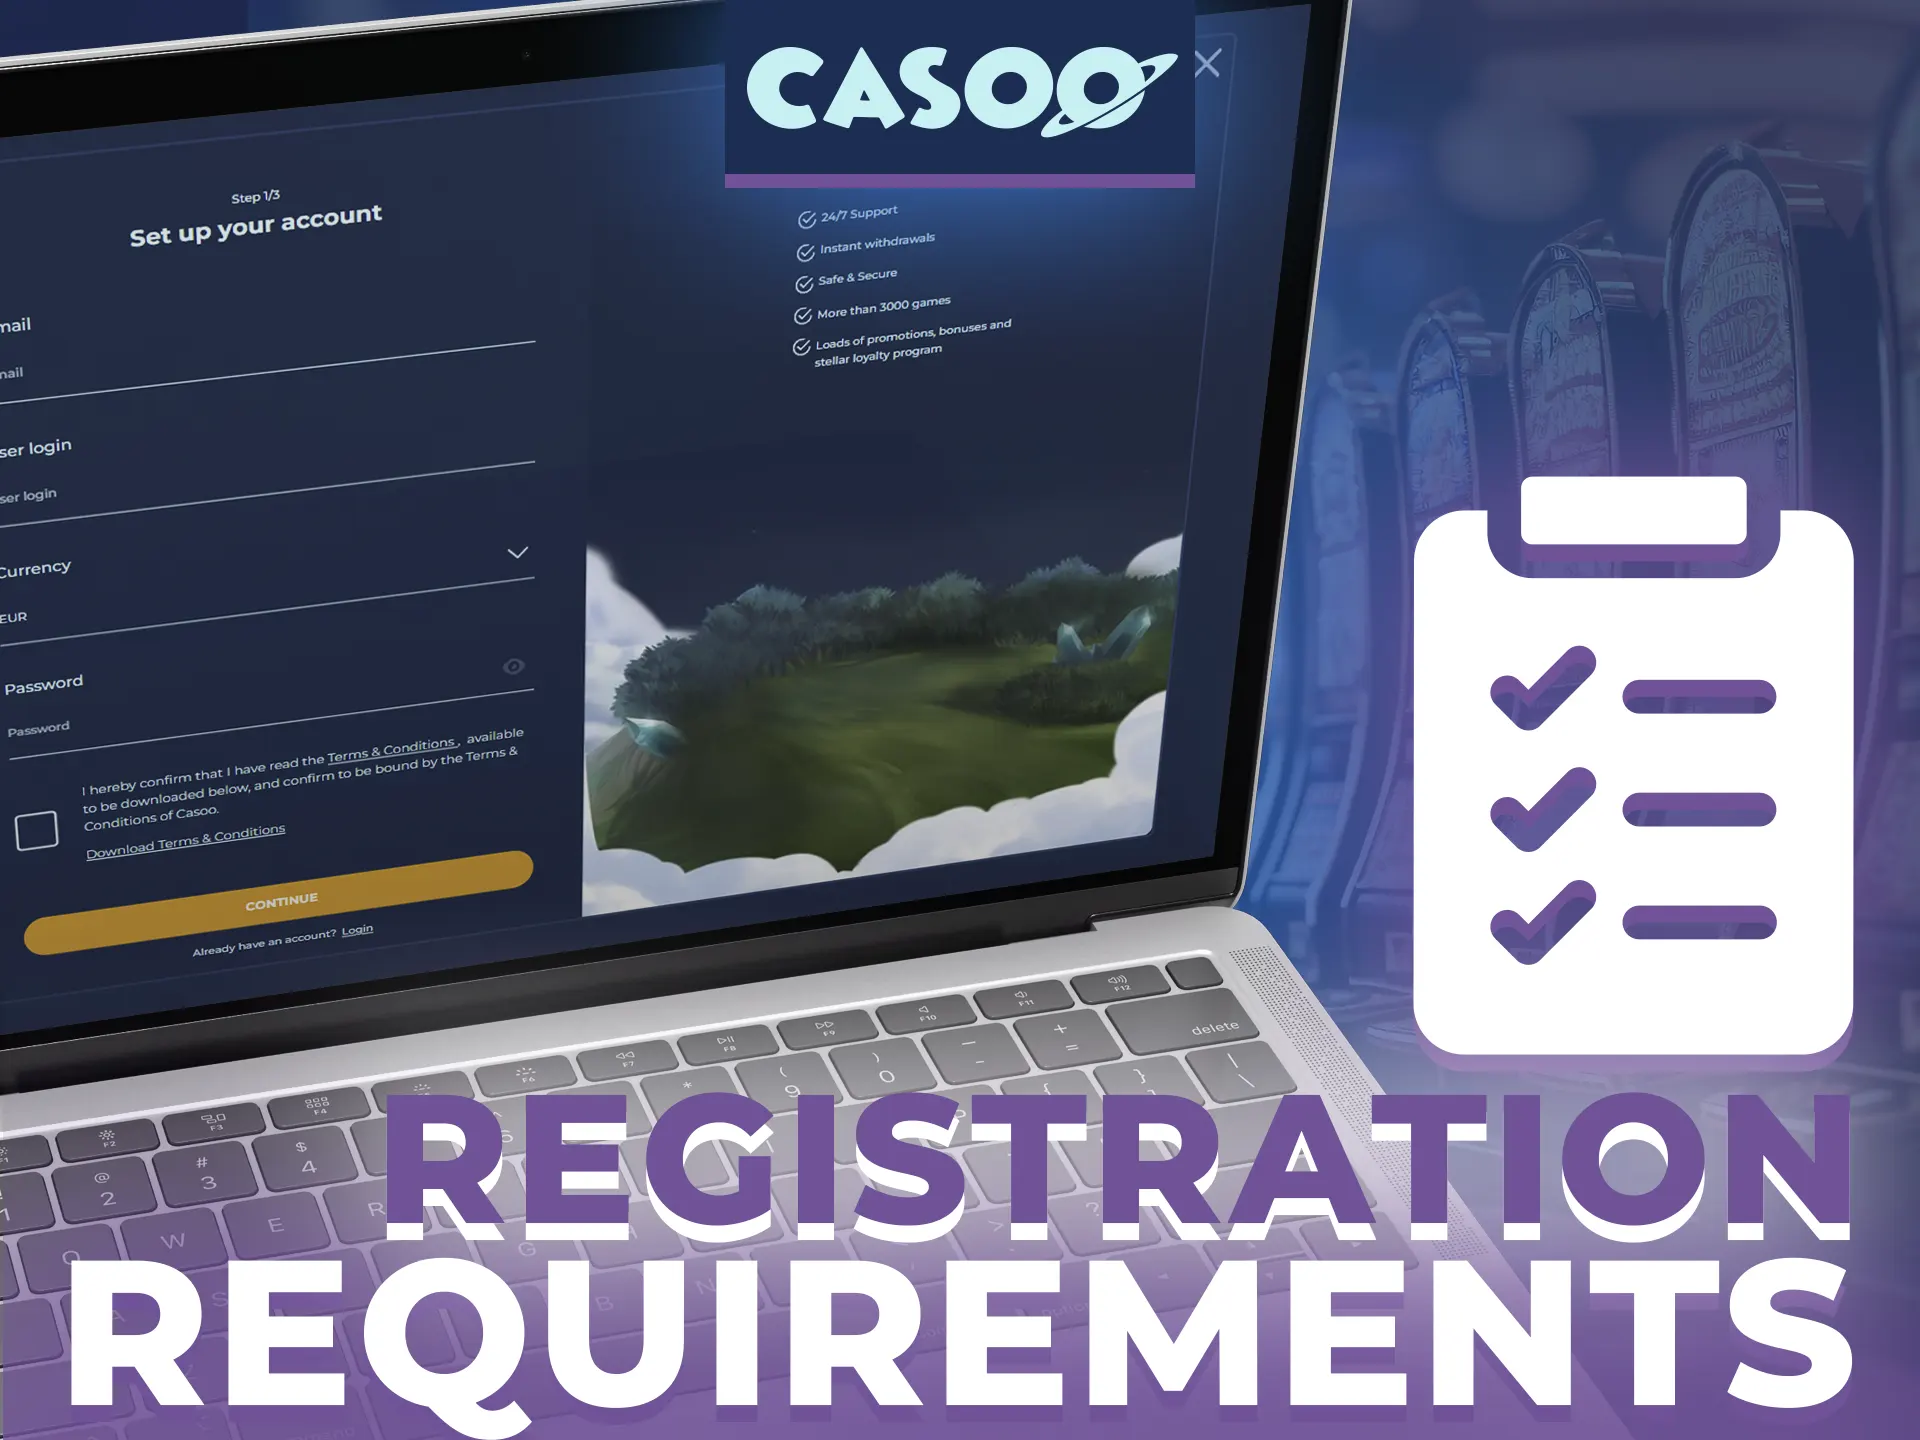 There is a small list of registration requirements at Casoo.